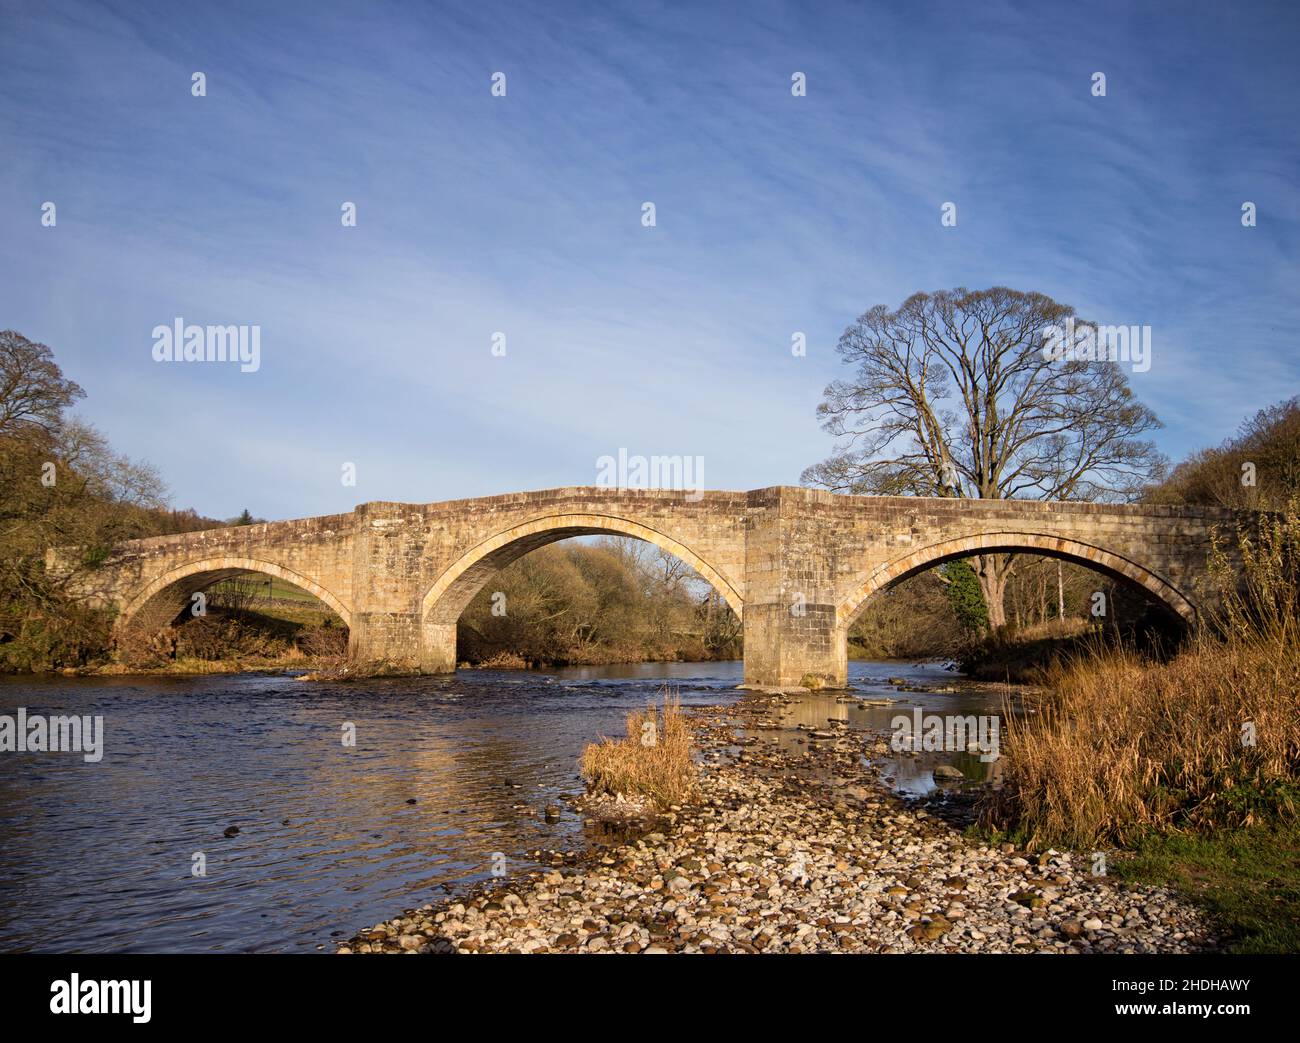 The gracious and historic Barden Bridge, spanning the River Wharfe at Barden, Skipton, UK. This historic bridge borders the grounds of Bolton Abbey. Stock Photo